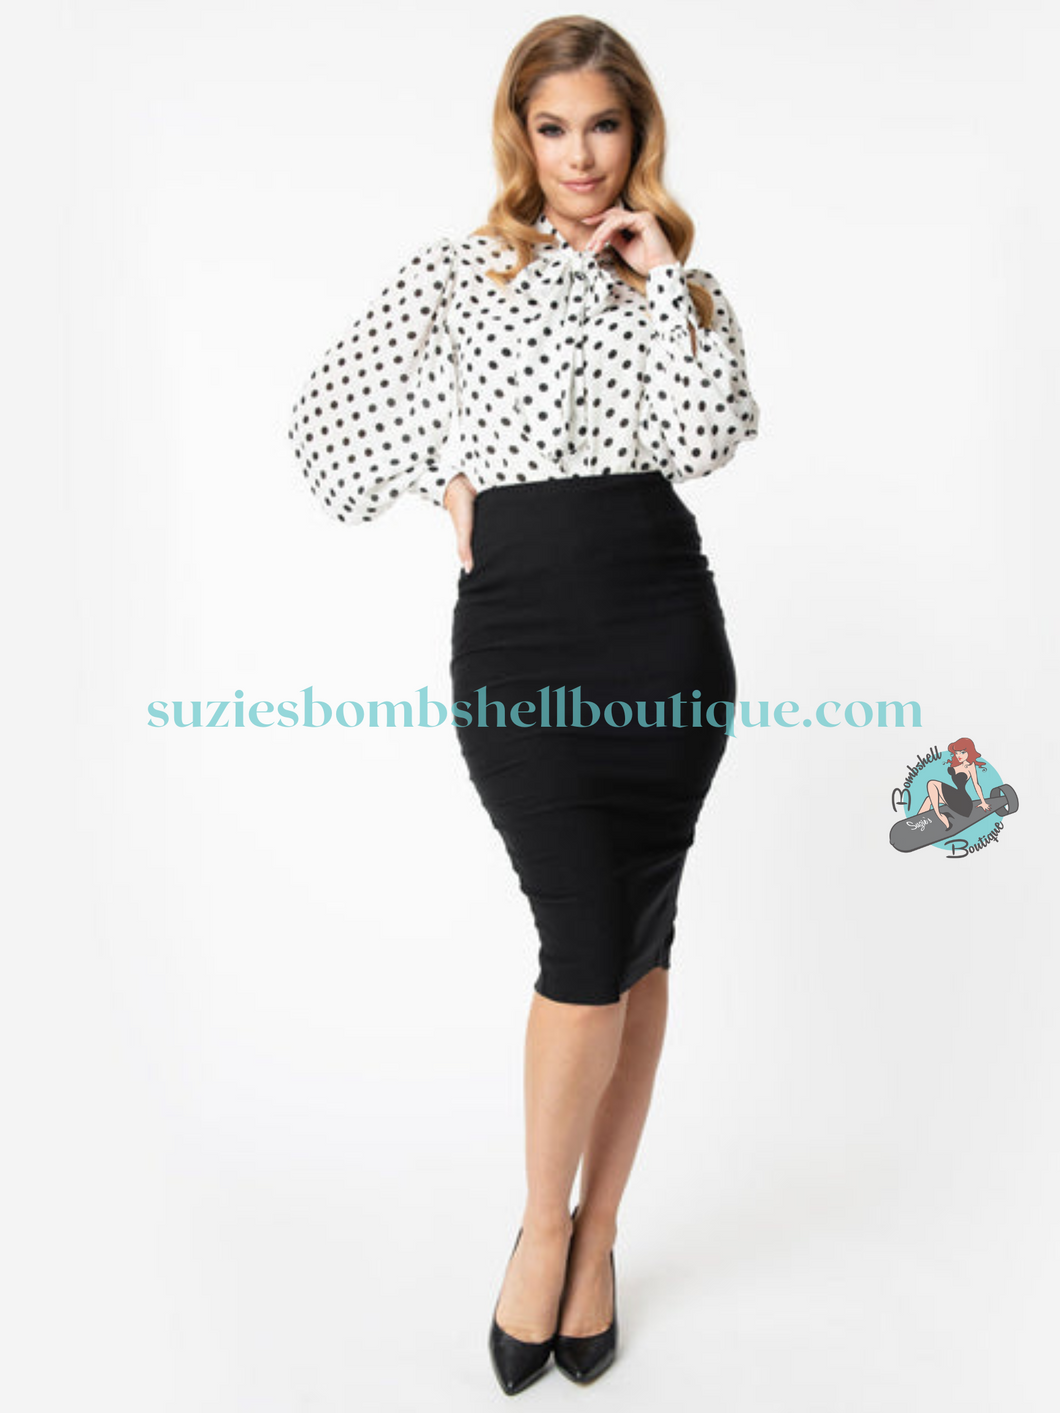 Unique Vintage Canada Unique Vintage Tracy High Waist Wiggle Skirt stretchy black fitted pencil skirt retro vintage 40s 50s pinup Canadian Pin-Up Shop Suzie's Bombshell Boutique